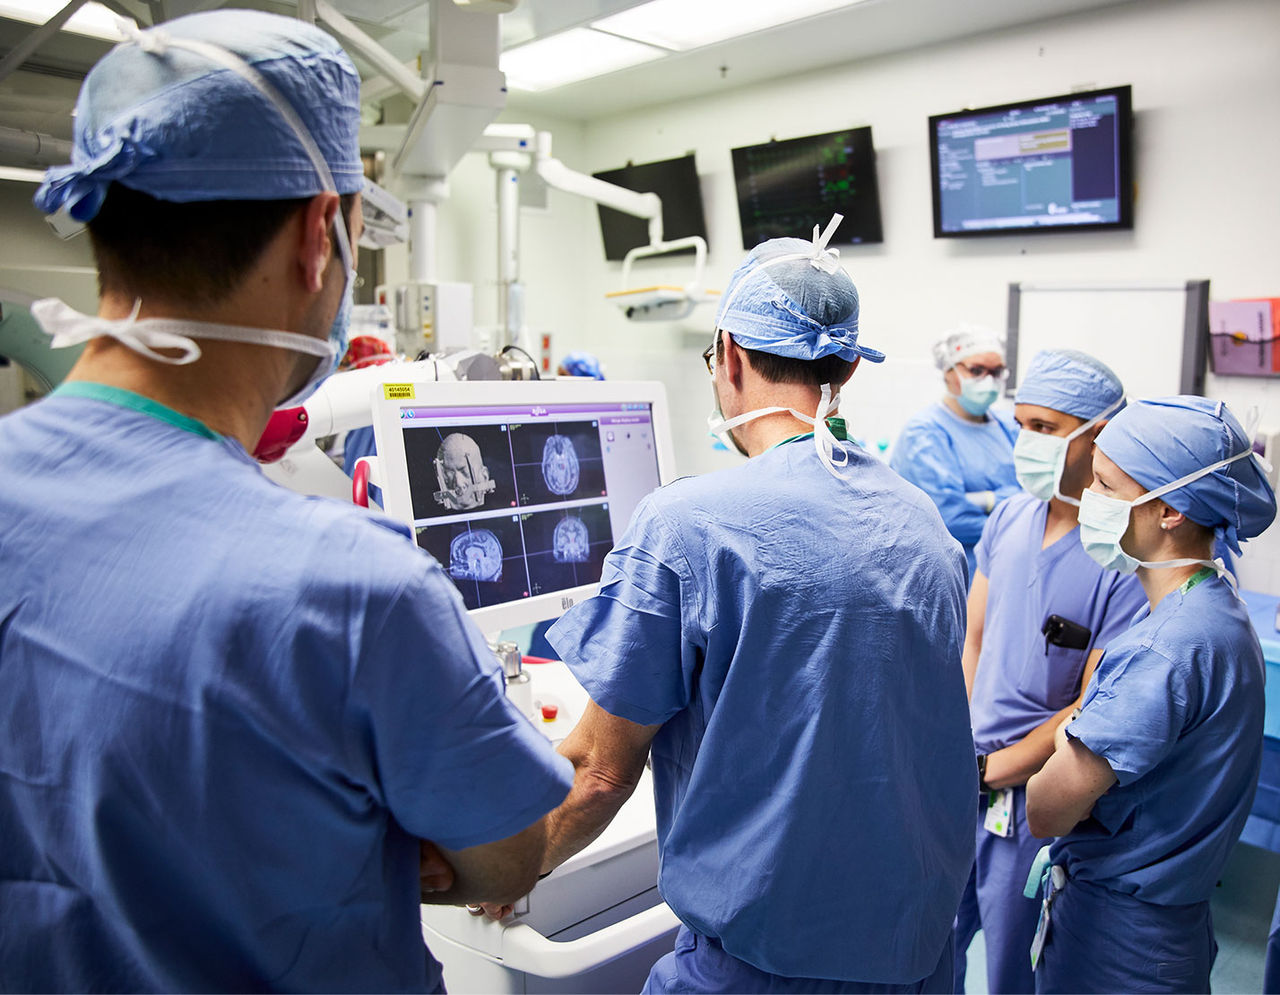 Providers in an operating room view patient scans on monitor 